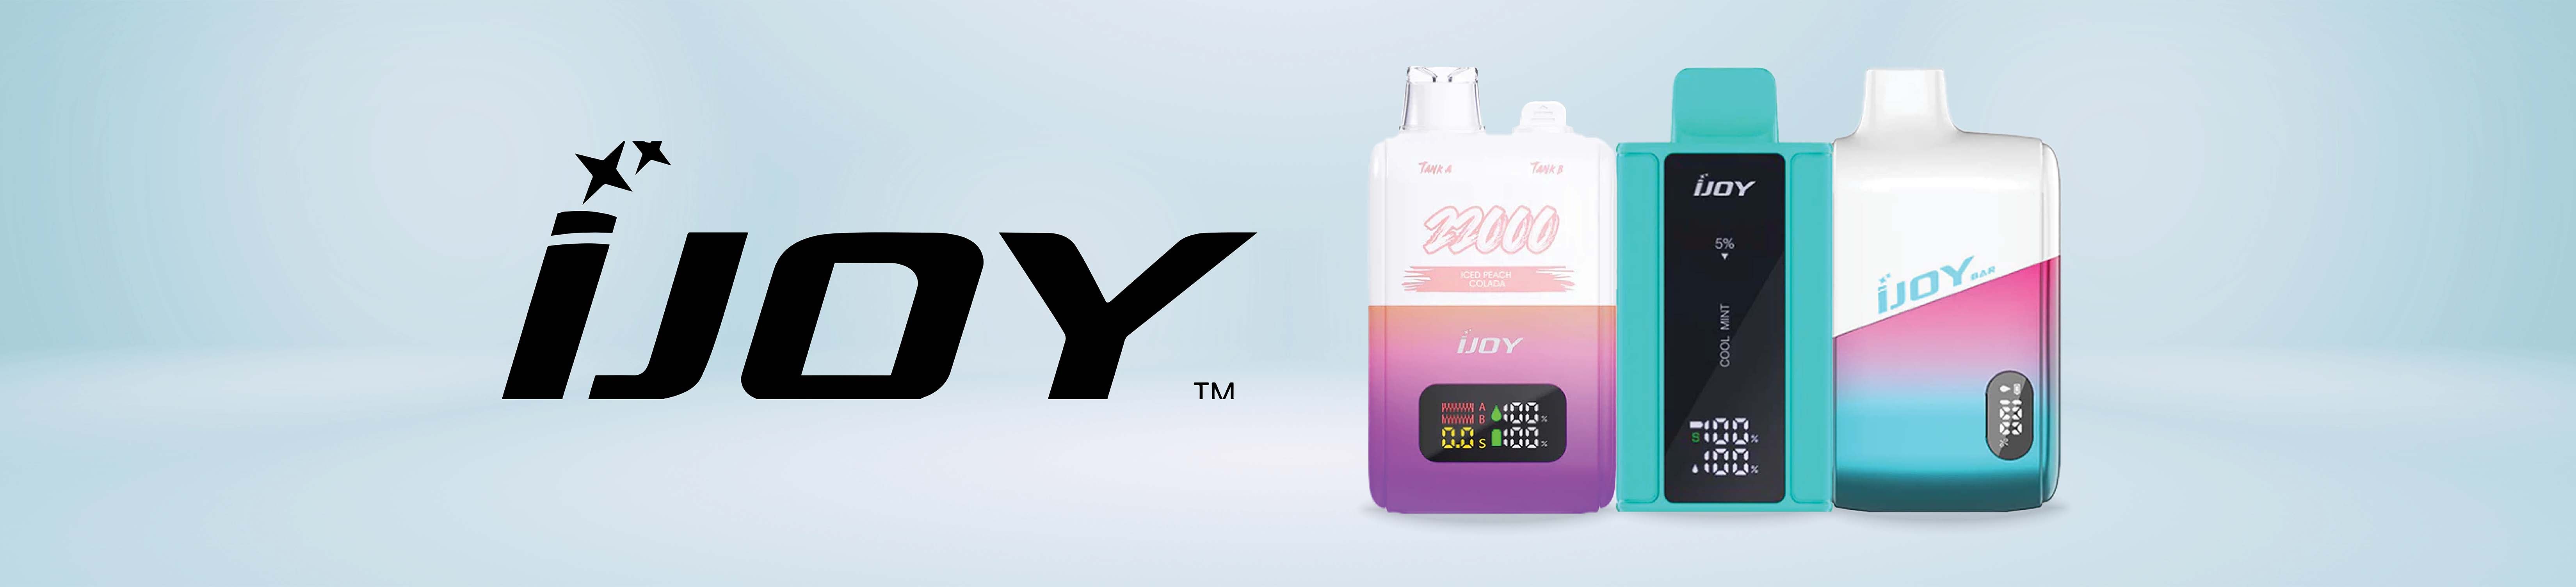 iJoy Smart Vapes Collection Banner